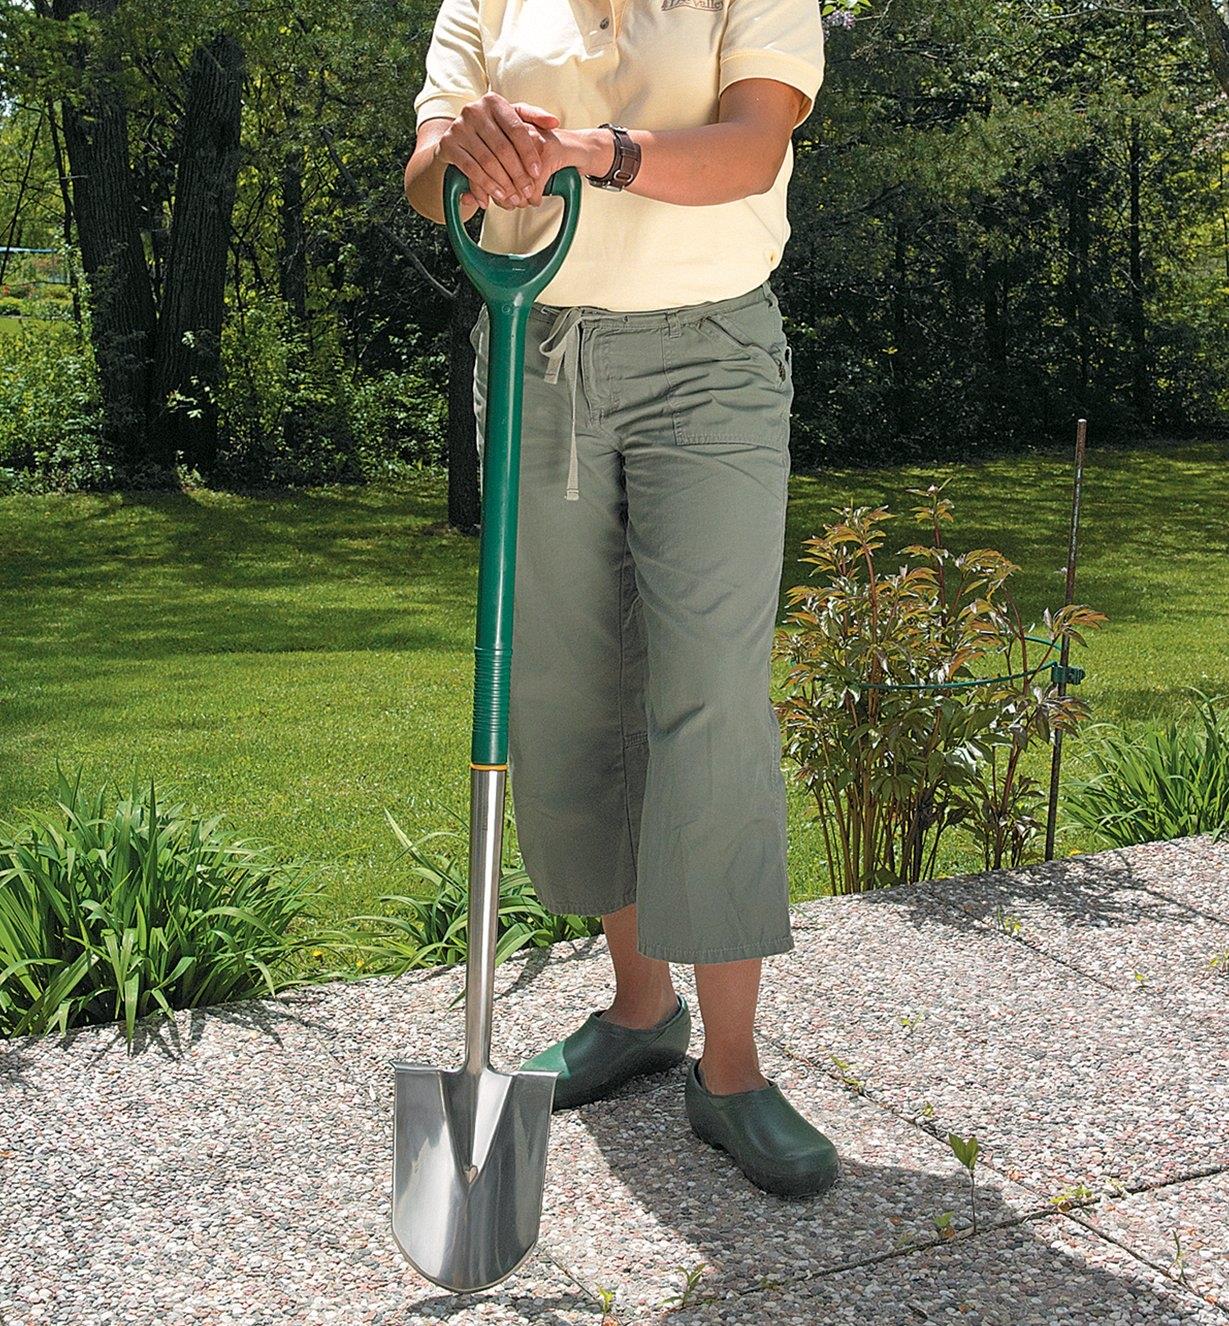 A woman holds the Border Shovel on a patio